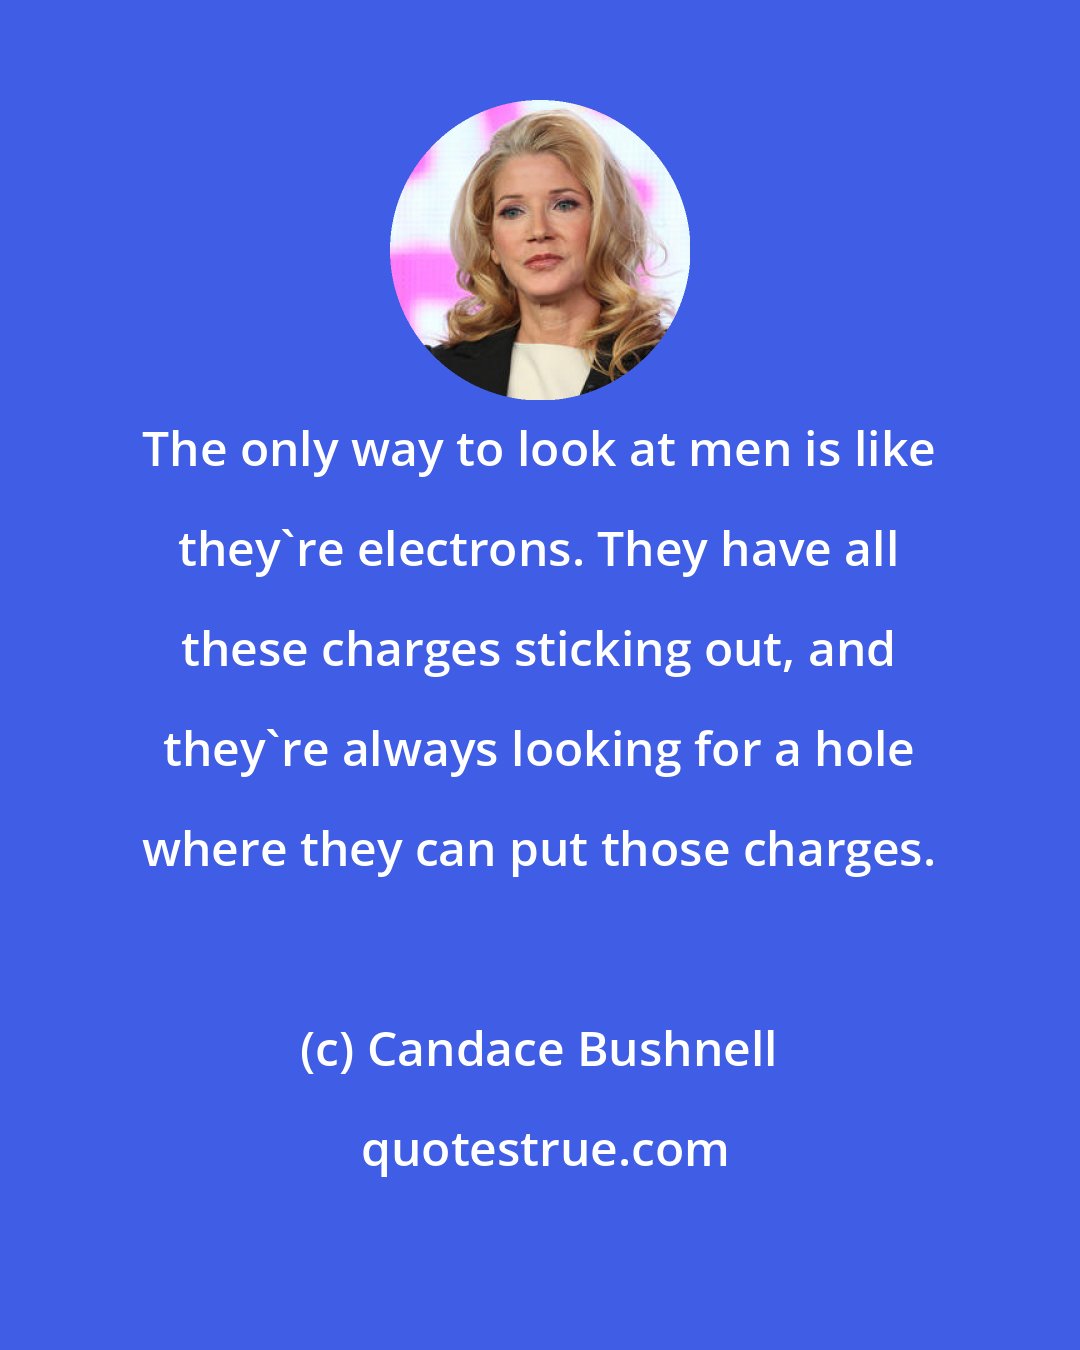 Candace Bushnell: The only way to look at men is like they're electrons. They have all these charges sticking out, and they're always looking for a hole where they can put those charges.